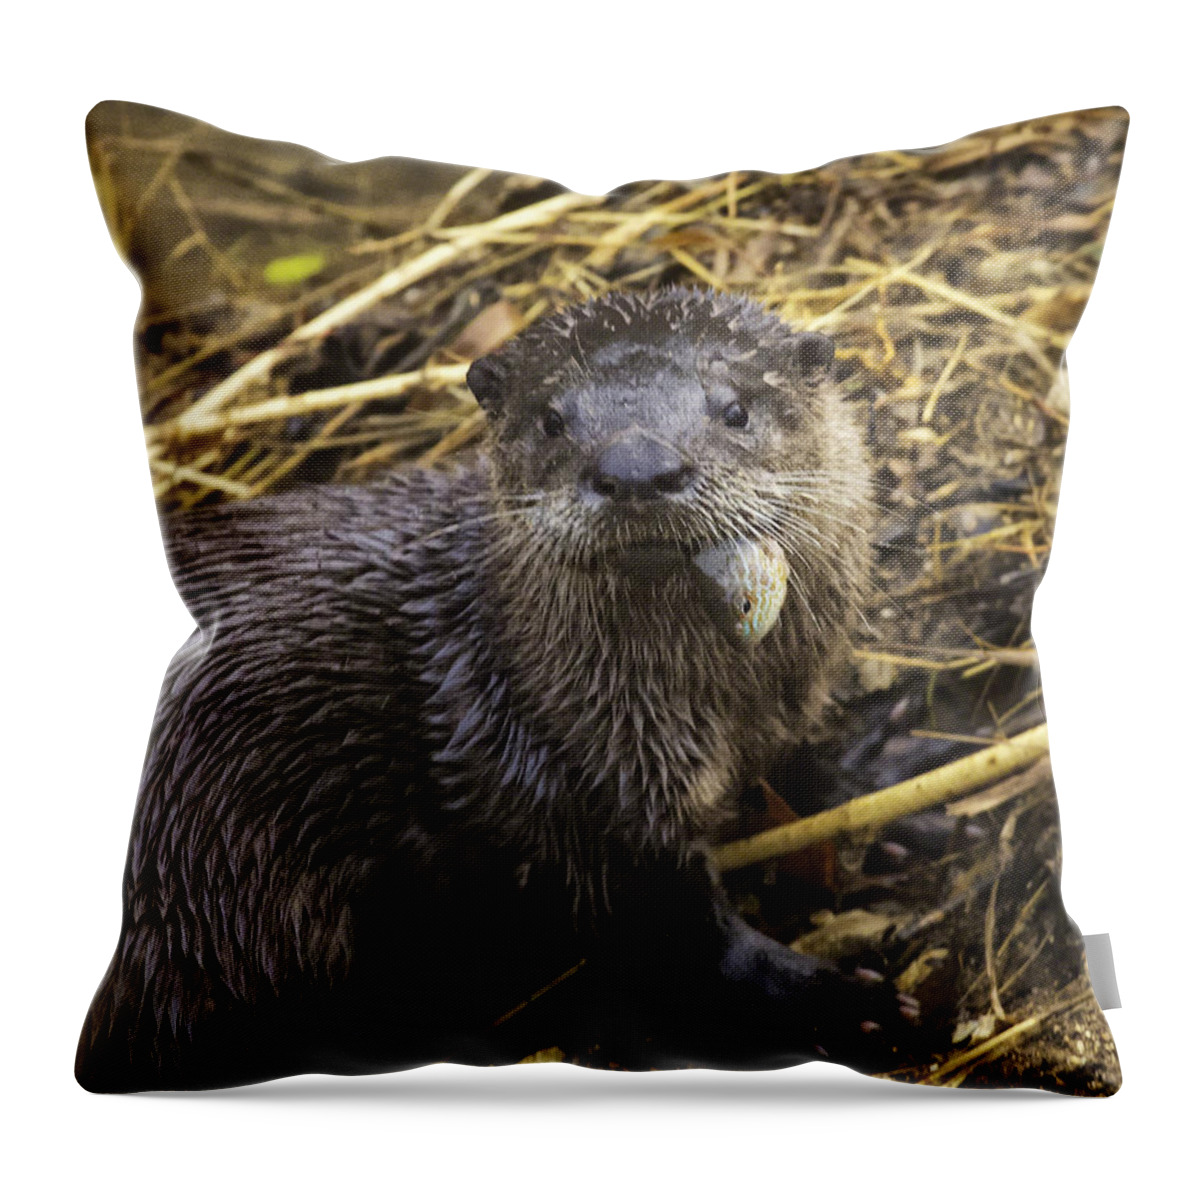 River Otter Throw Pillow featuring the photograph Eatin' My Fish by Michael Dougherty